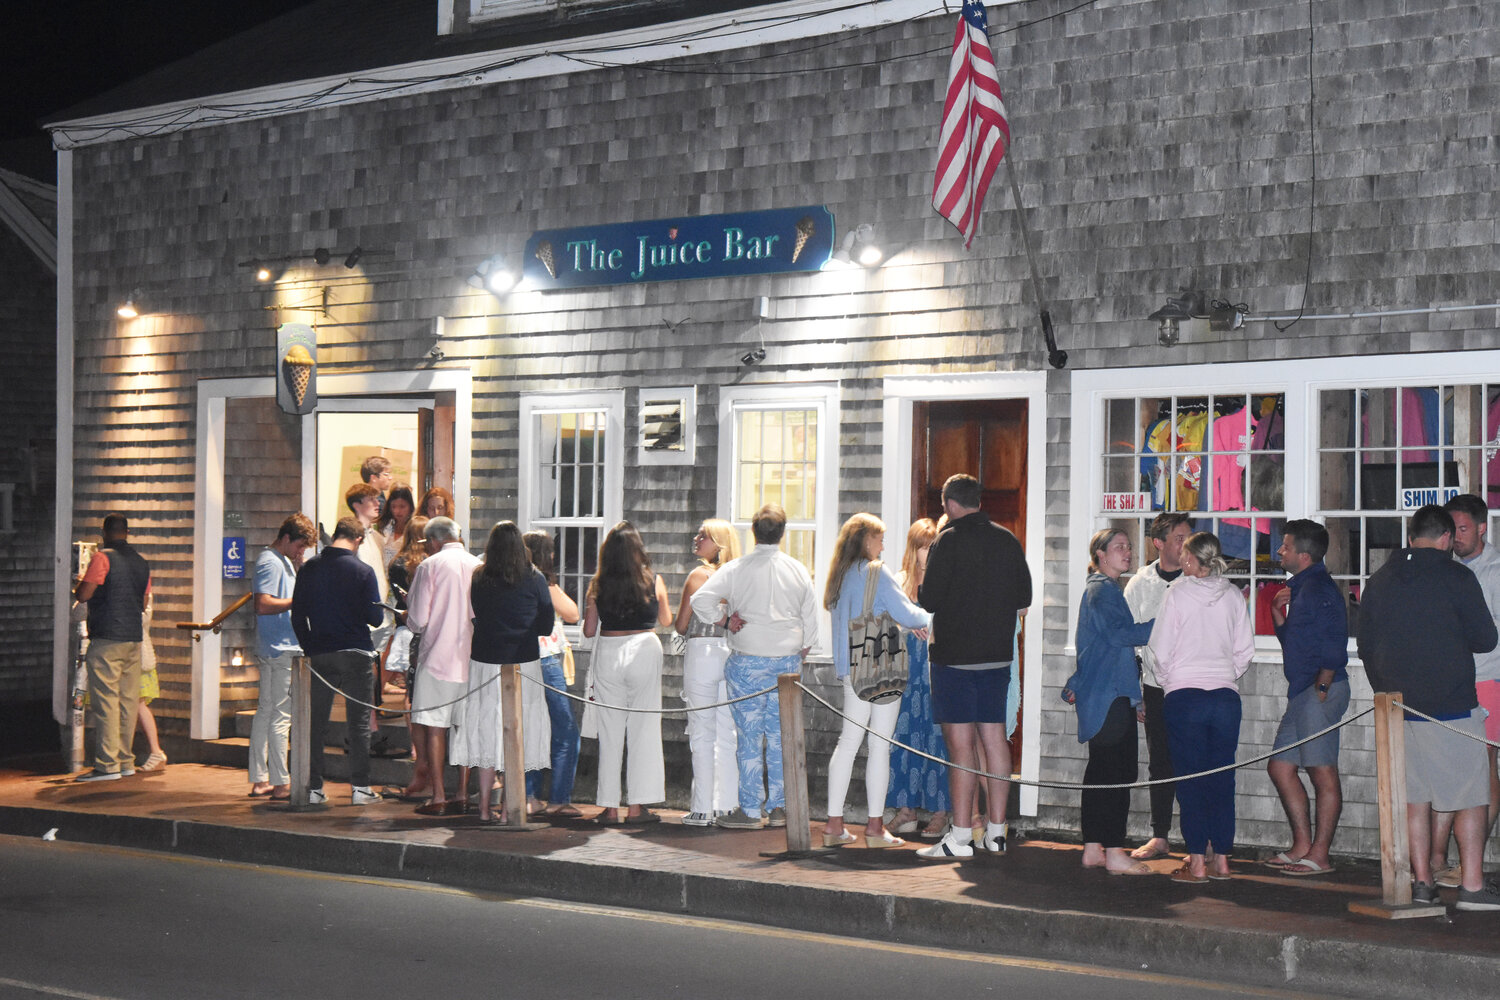 The line outside The Juice Bar just before 10 p.m. Tuesday night.